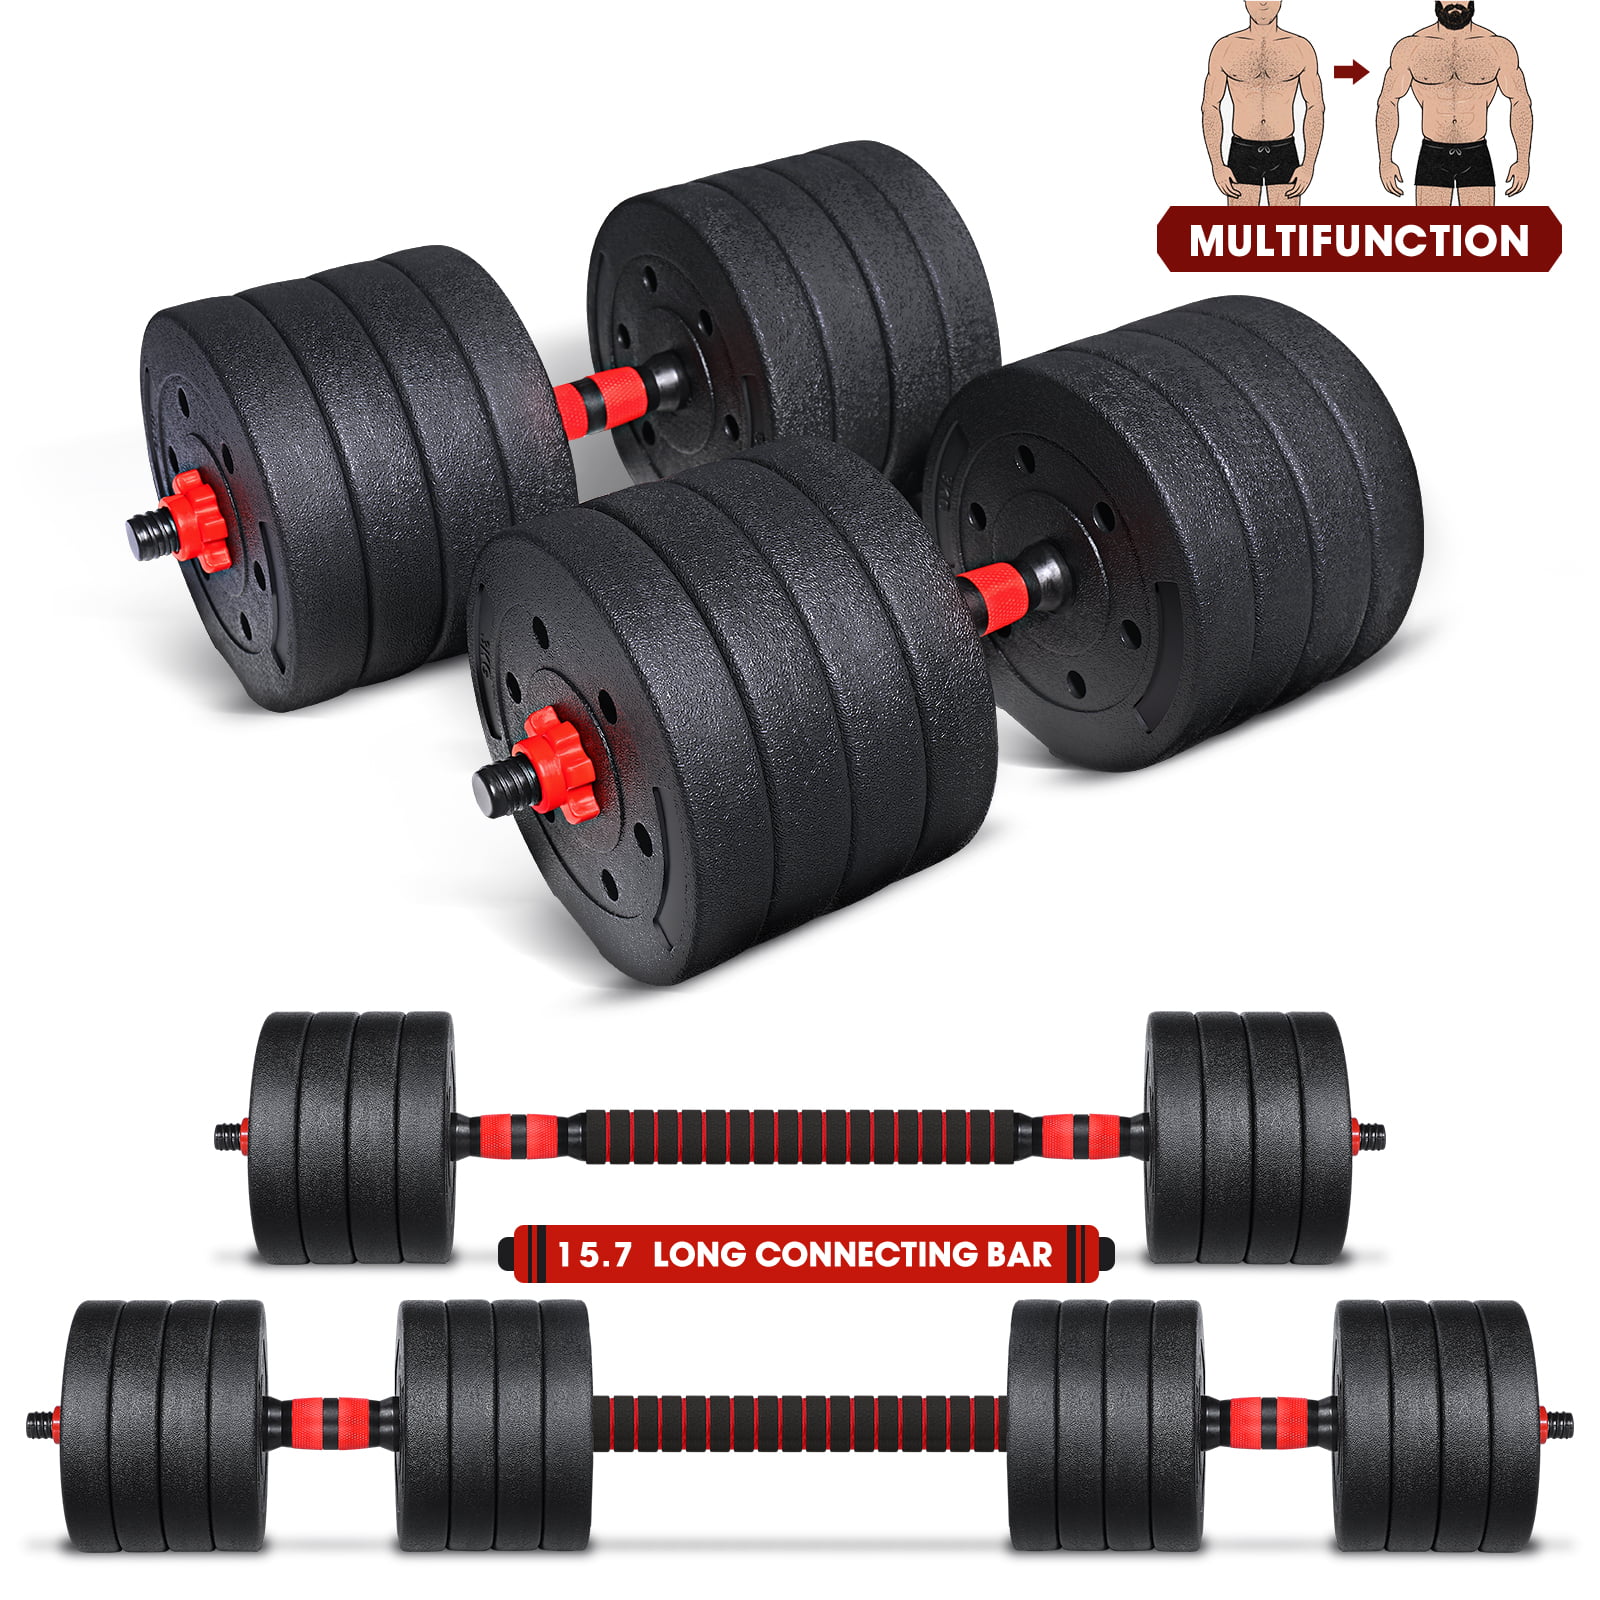 Solid Steel Weights Dumbbells Barbell Set with Connecting Rod for Home Fitness MOVTOTOP Dumbbells Set 66.14 LBS Adjustable Dumbbells Set for Women and Men